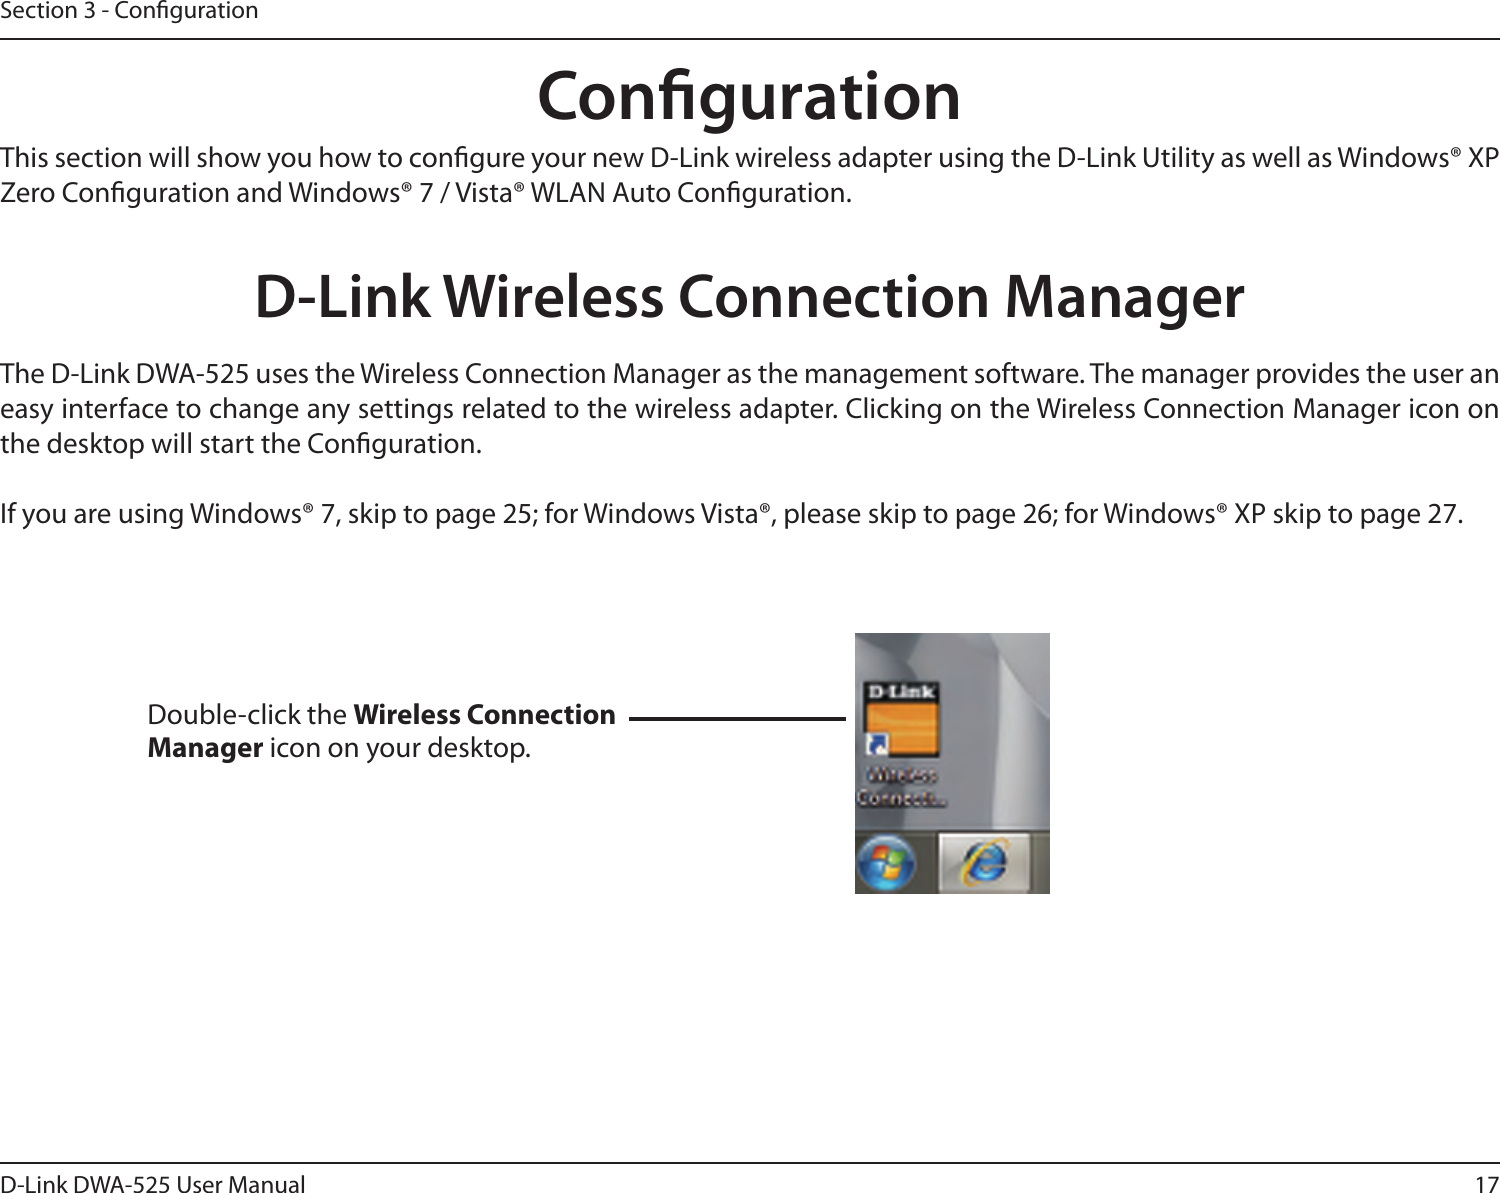 17D-Link DWA-525 User ManualSection 3 - CongurationCongurationD-Link Wireless Connection ManagerThis section will show you how to congure your new D-Link wireless adapter using the D-Link Utility as well as Windows® XP Zero Conguration and Windows® 7 / Vista® WLAN Auto Conguration.The D-Link DWA-525 uses the Wireless Connection Manager as the management software. The manager provides the user an easy interface to change any settings related to the wireless adapter. Clicking on the Wireless Connection Manager icon on the desktop will start the Conguration.IfyouareusingWindows®7,skiptopage25;forWindowsVista®,pleaseskiptopage26;forWindows®XPskiptopage27.Double-click the Wireless Connection Manager icon on your desktop.